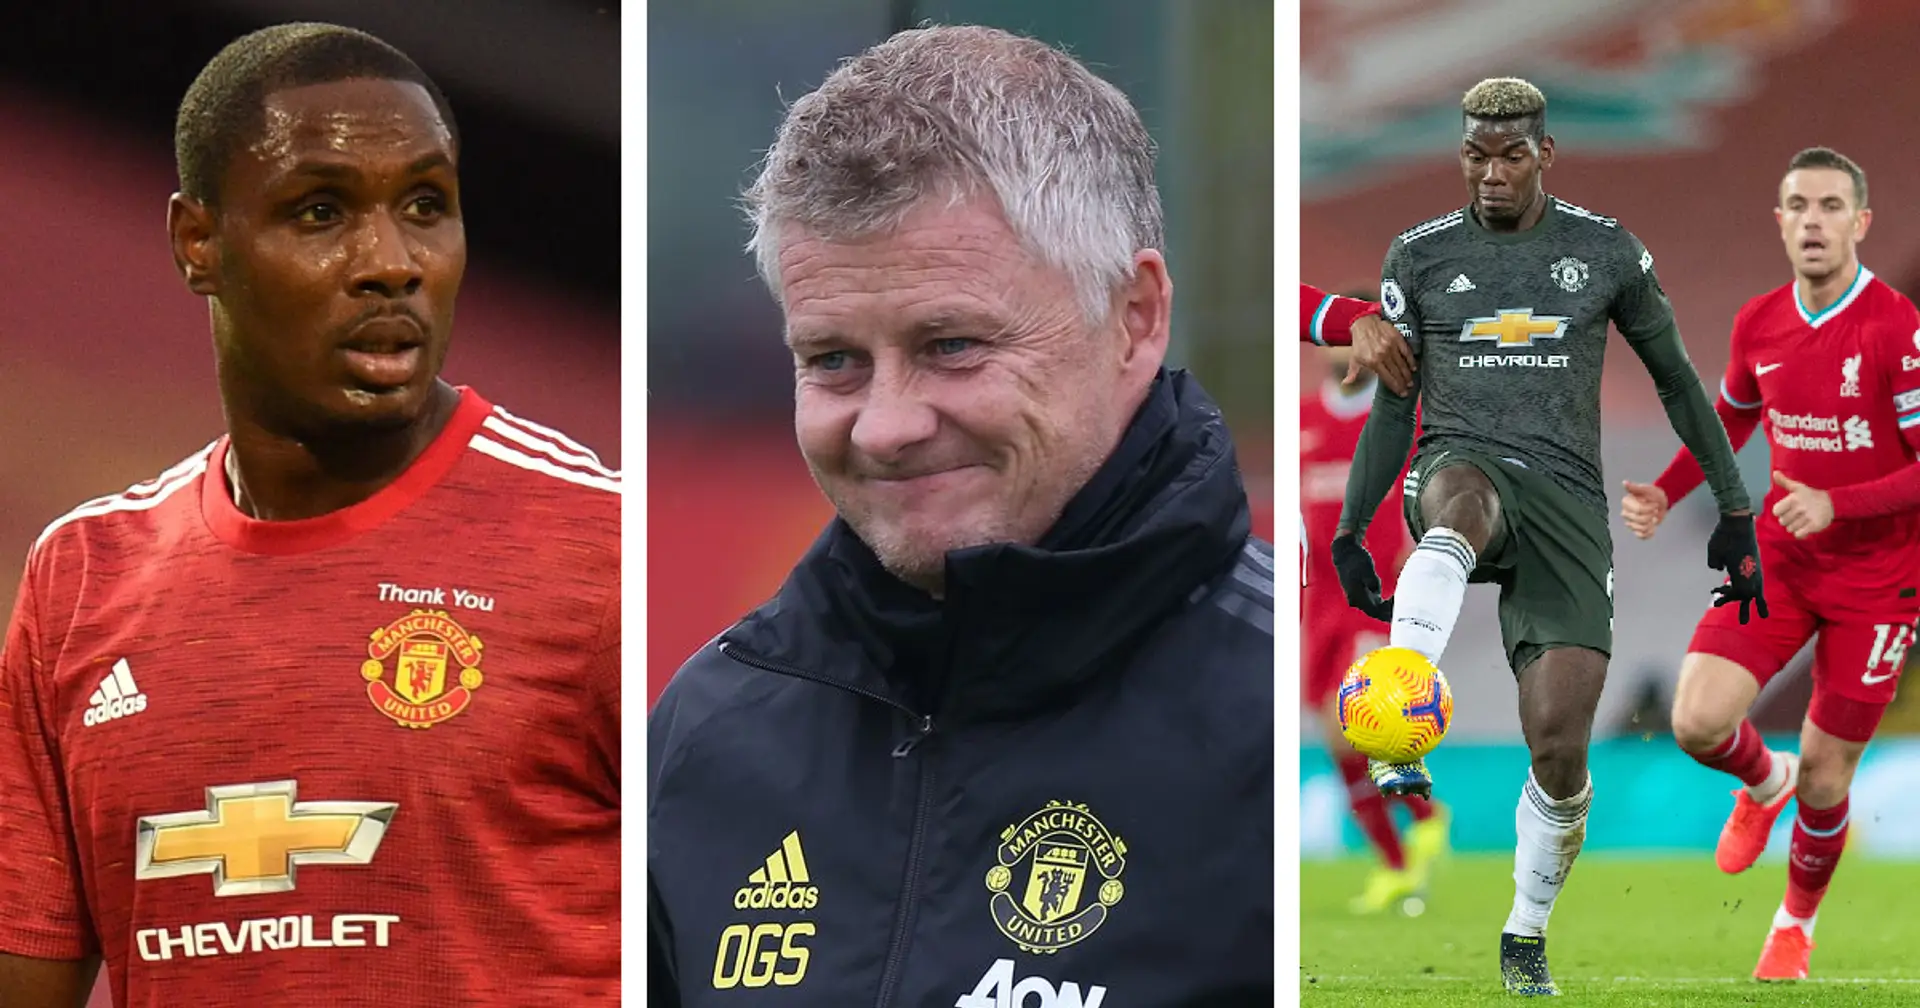 Transfer rumours, next fixtures, team news, rivals: Man United latest in 1 click